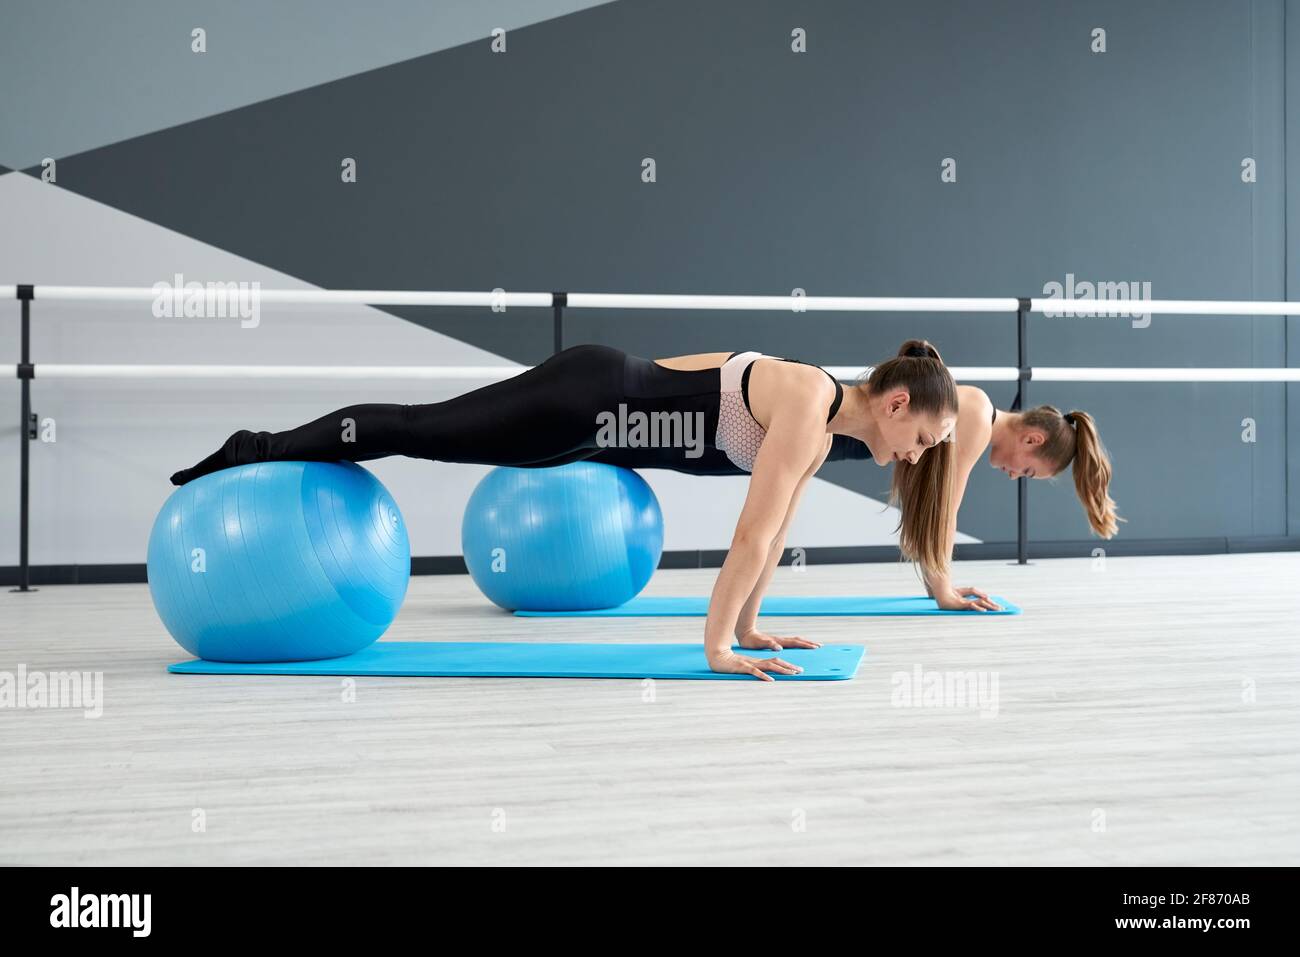 Side view of two attractive fit women training core muscles with legs on big blue fitness balls in studio with handrails. Gorgeous fitnesswomen practicing plank position on mats. Concept of sport. Stock Photo